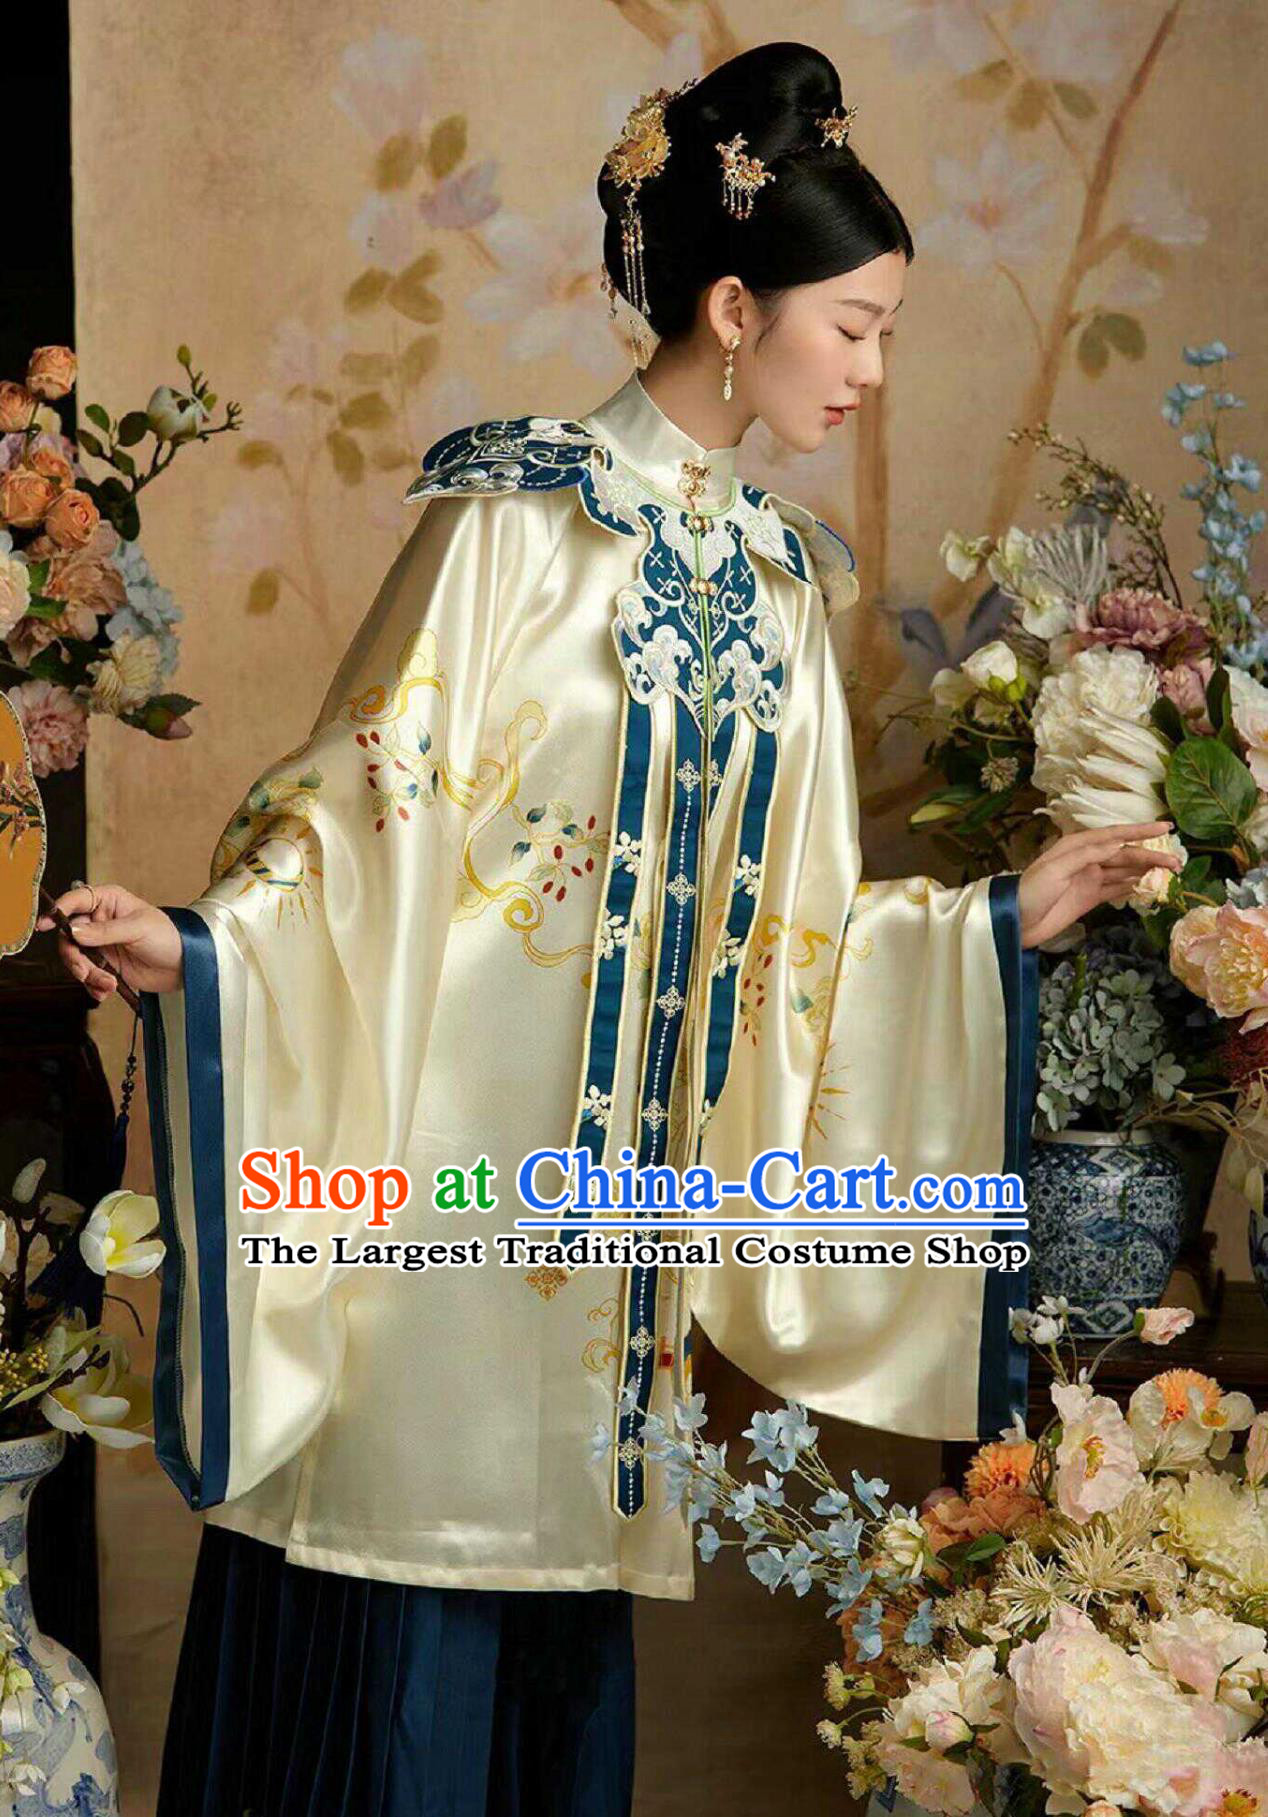 Ancient Chinese Ming Dynasty Female Costumes Chinese Traditional Hanfu Noble Woman Clothing Online Buy